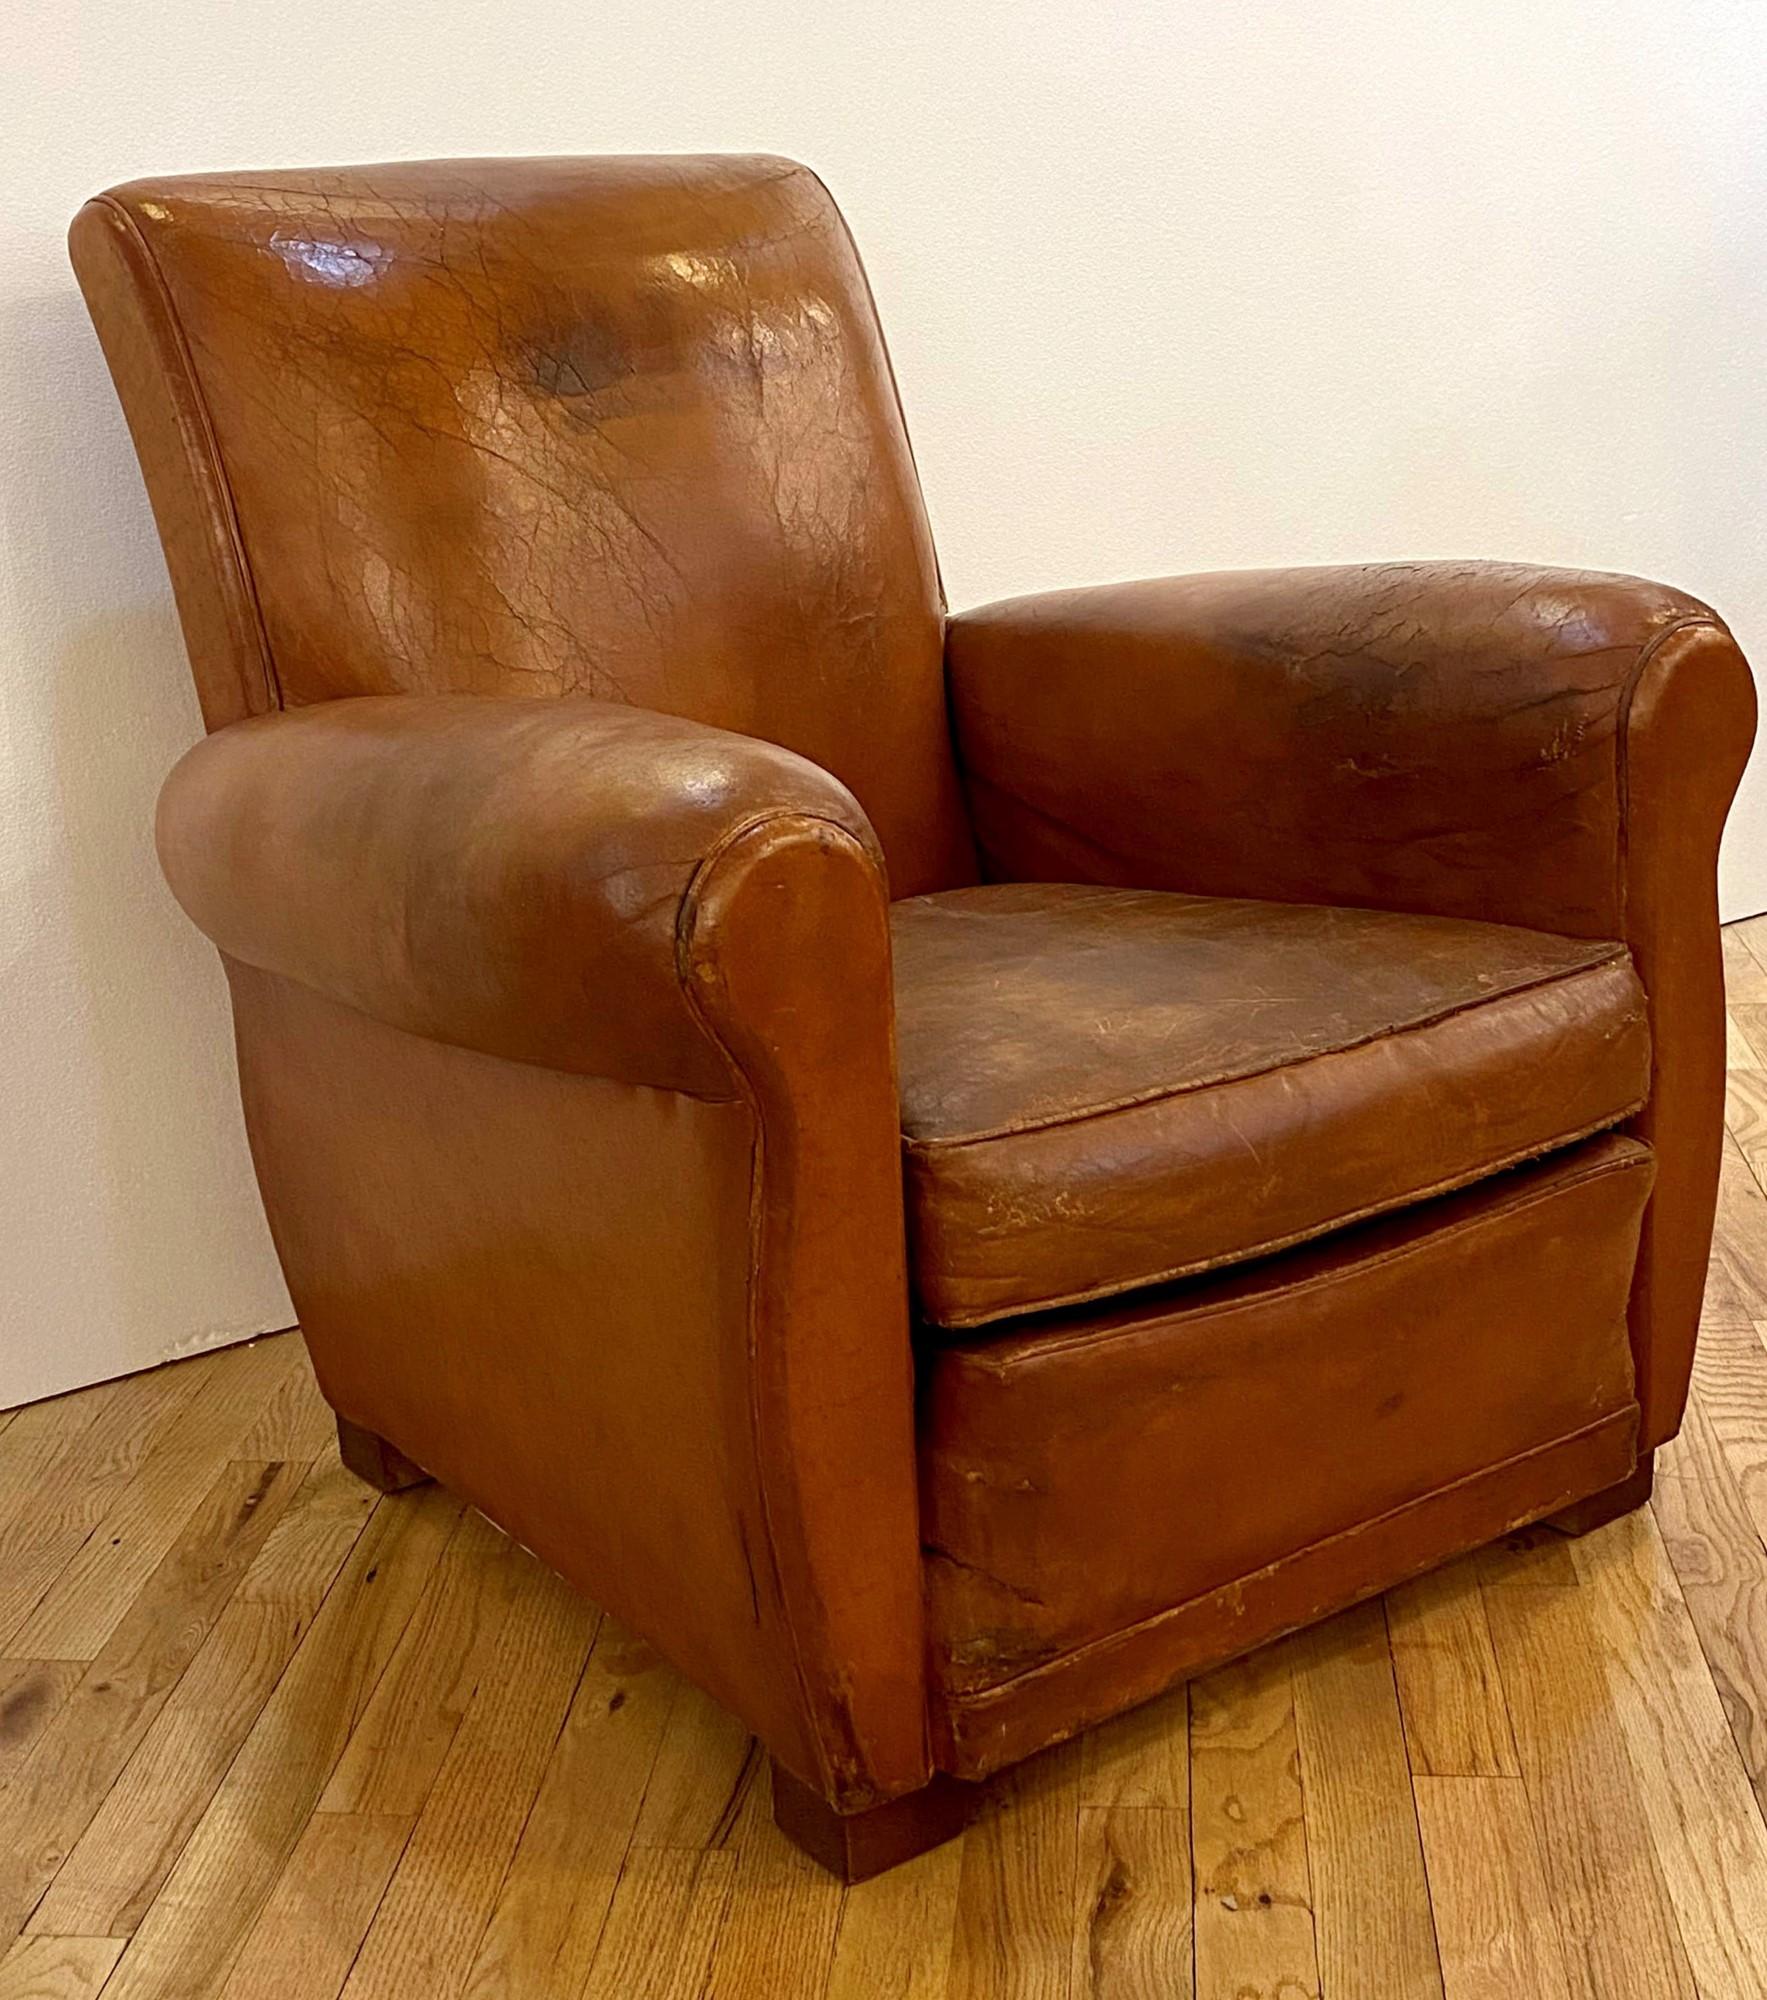 Vintage Art Deco French leather club chair. This chair has been refurbished and has only minor wear and cracking. One available. This can be seen at our 333 West 52nd St location in the Theater District West of Manhattan.